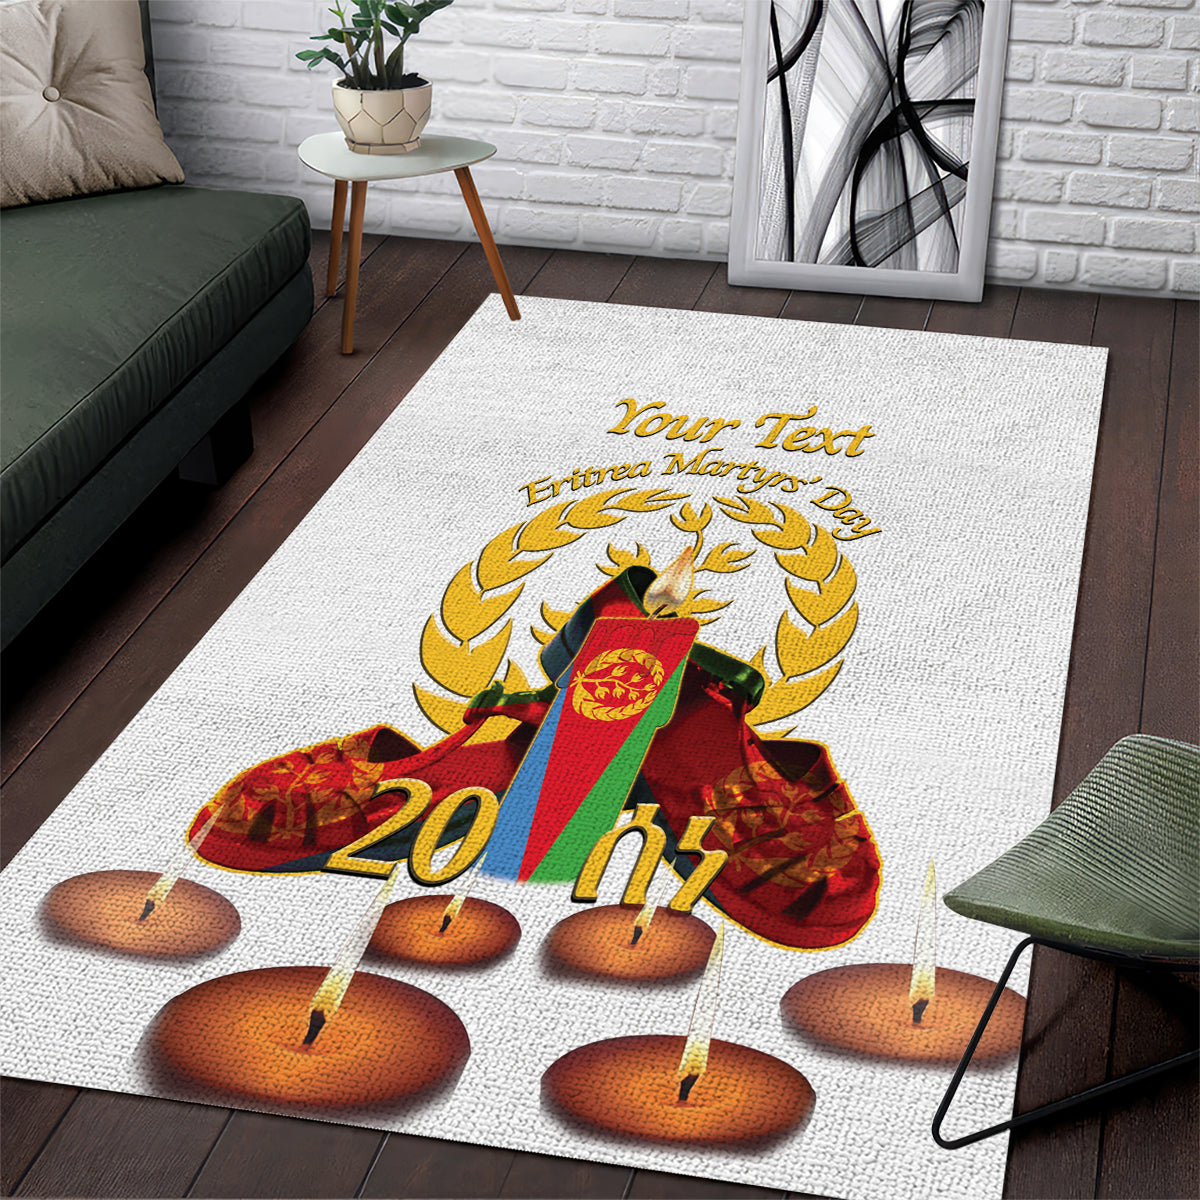 Custom Eritrea Martyrs' Day Area Rug 20 June Shida Shoes With Candles - White